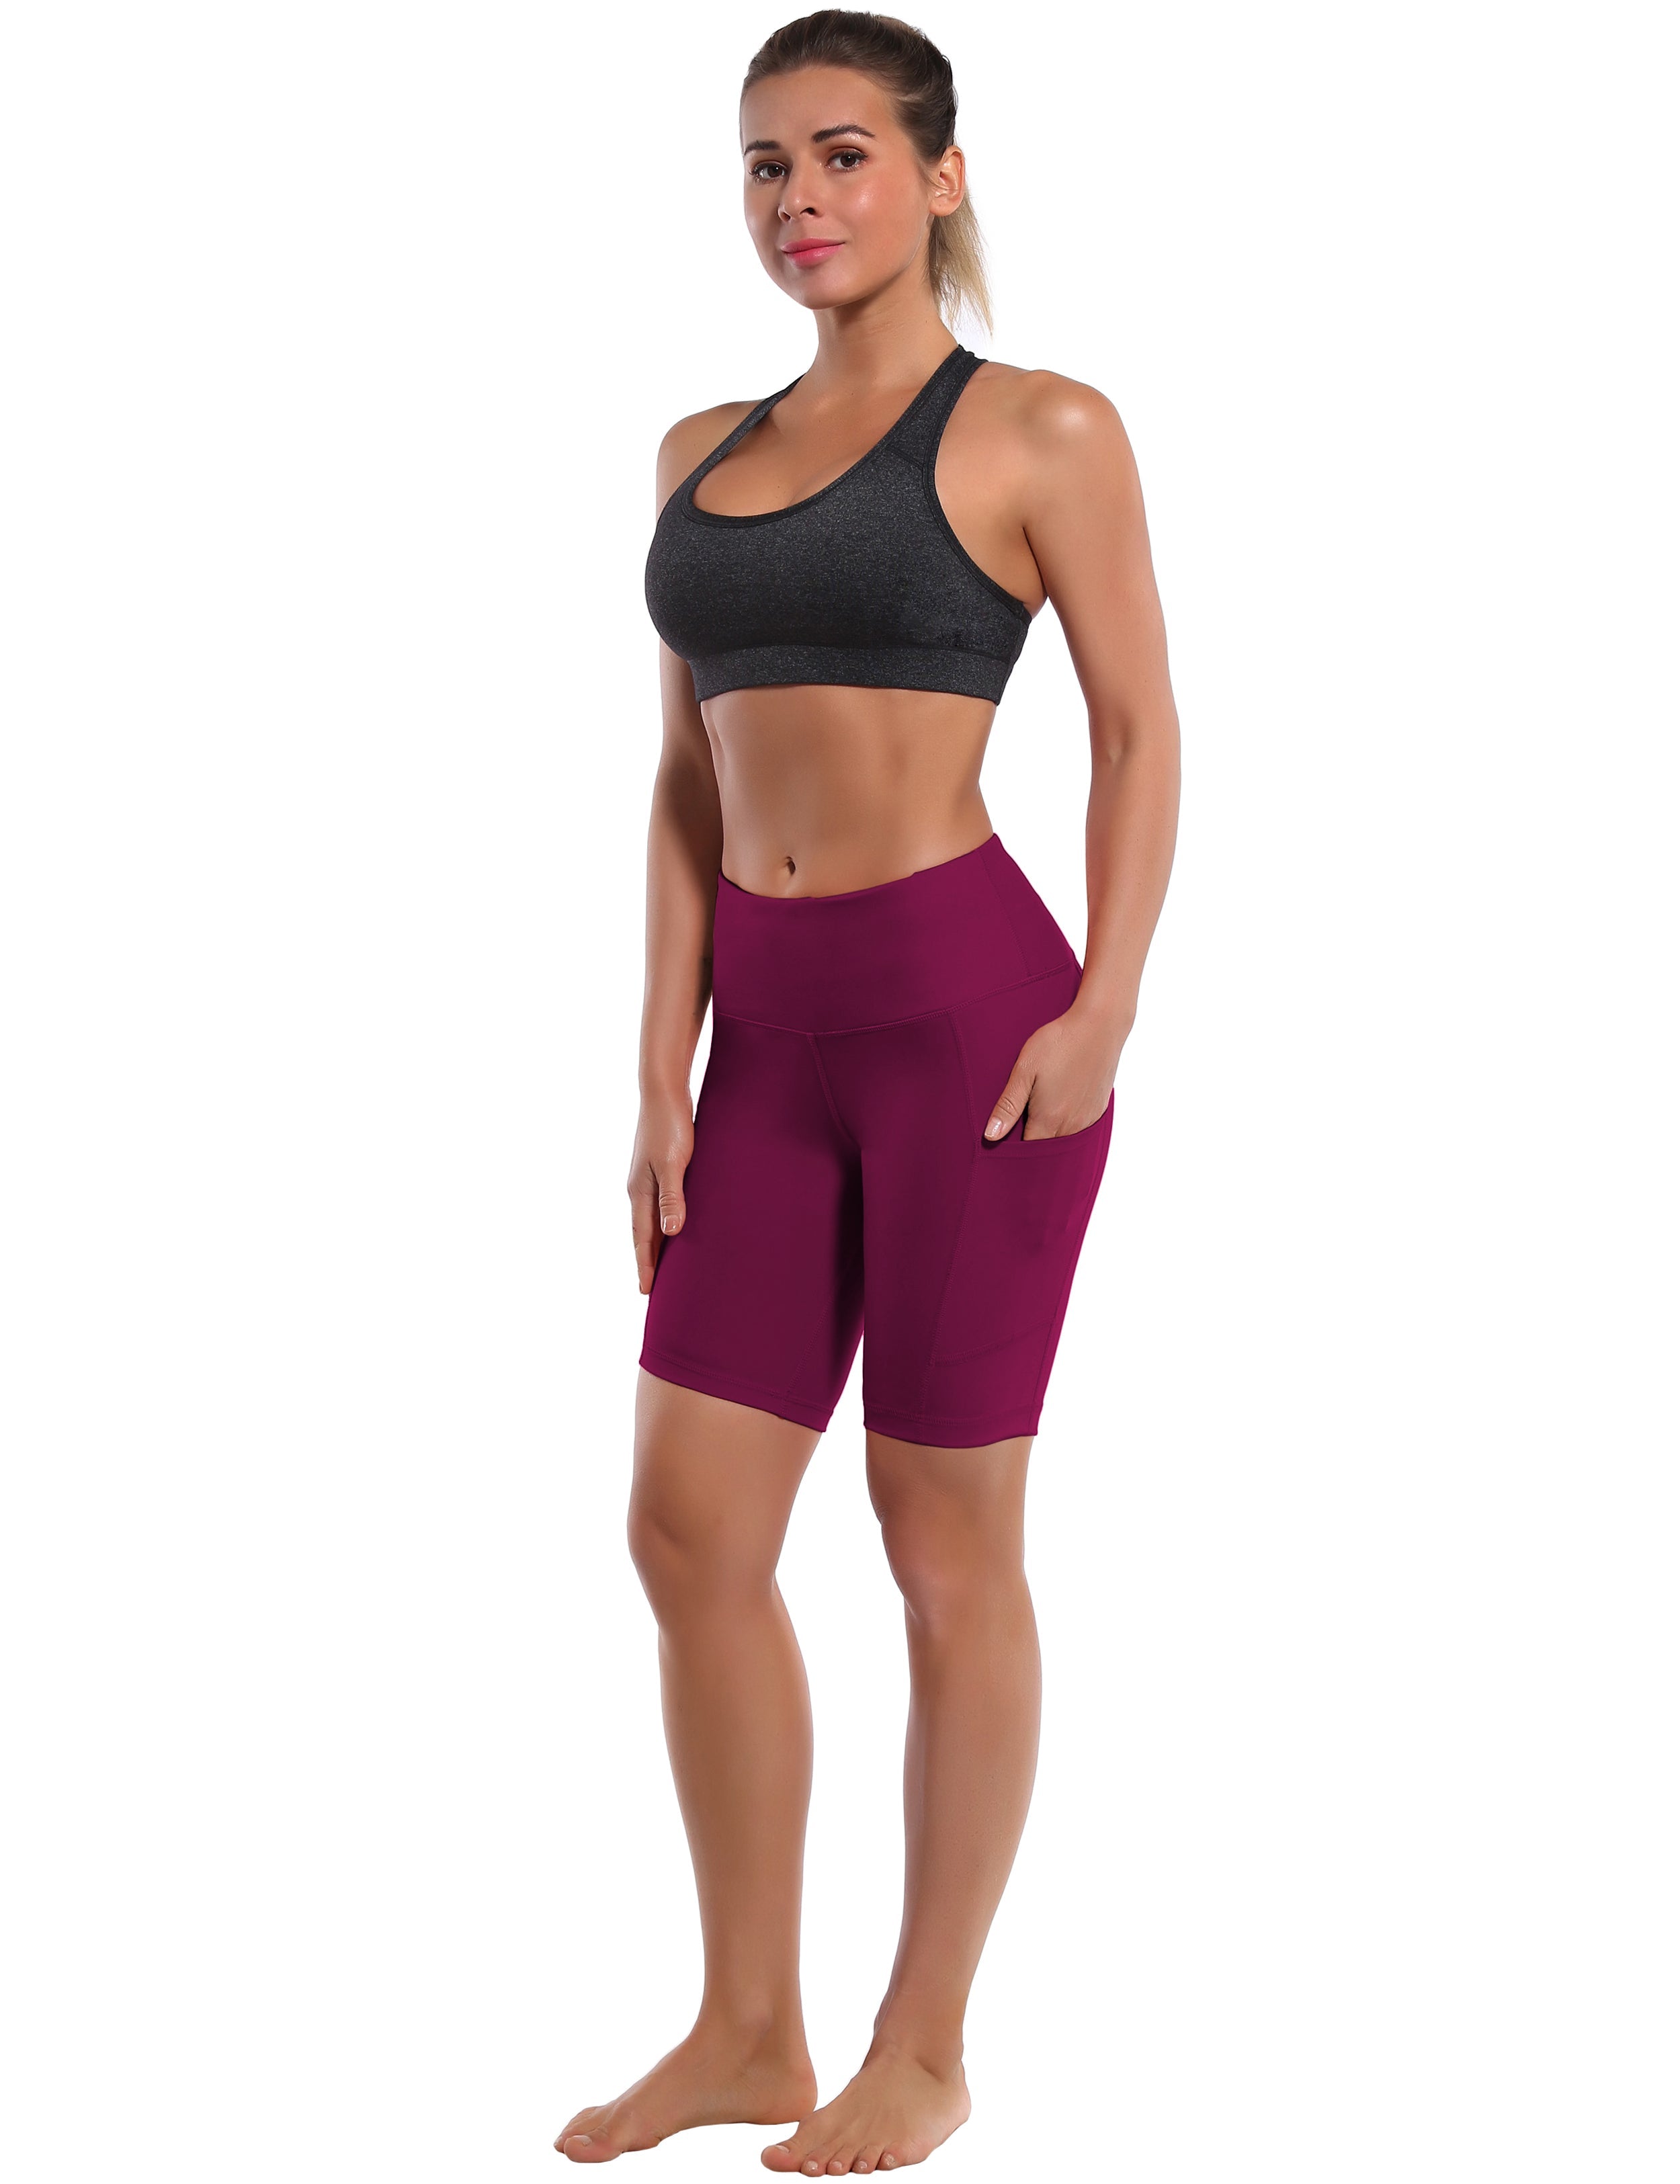 8" Side Pockets Pilates Shorts grapevine Sleek, soft, smooth and totally comfortable: our newest style is here. Softest-ever fabric High elasticity High density 4-way stretch Fabric doesn't attract lint easily No see-through Moisture-wicking Machine wash 75% Nylon, 25% Spandex